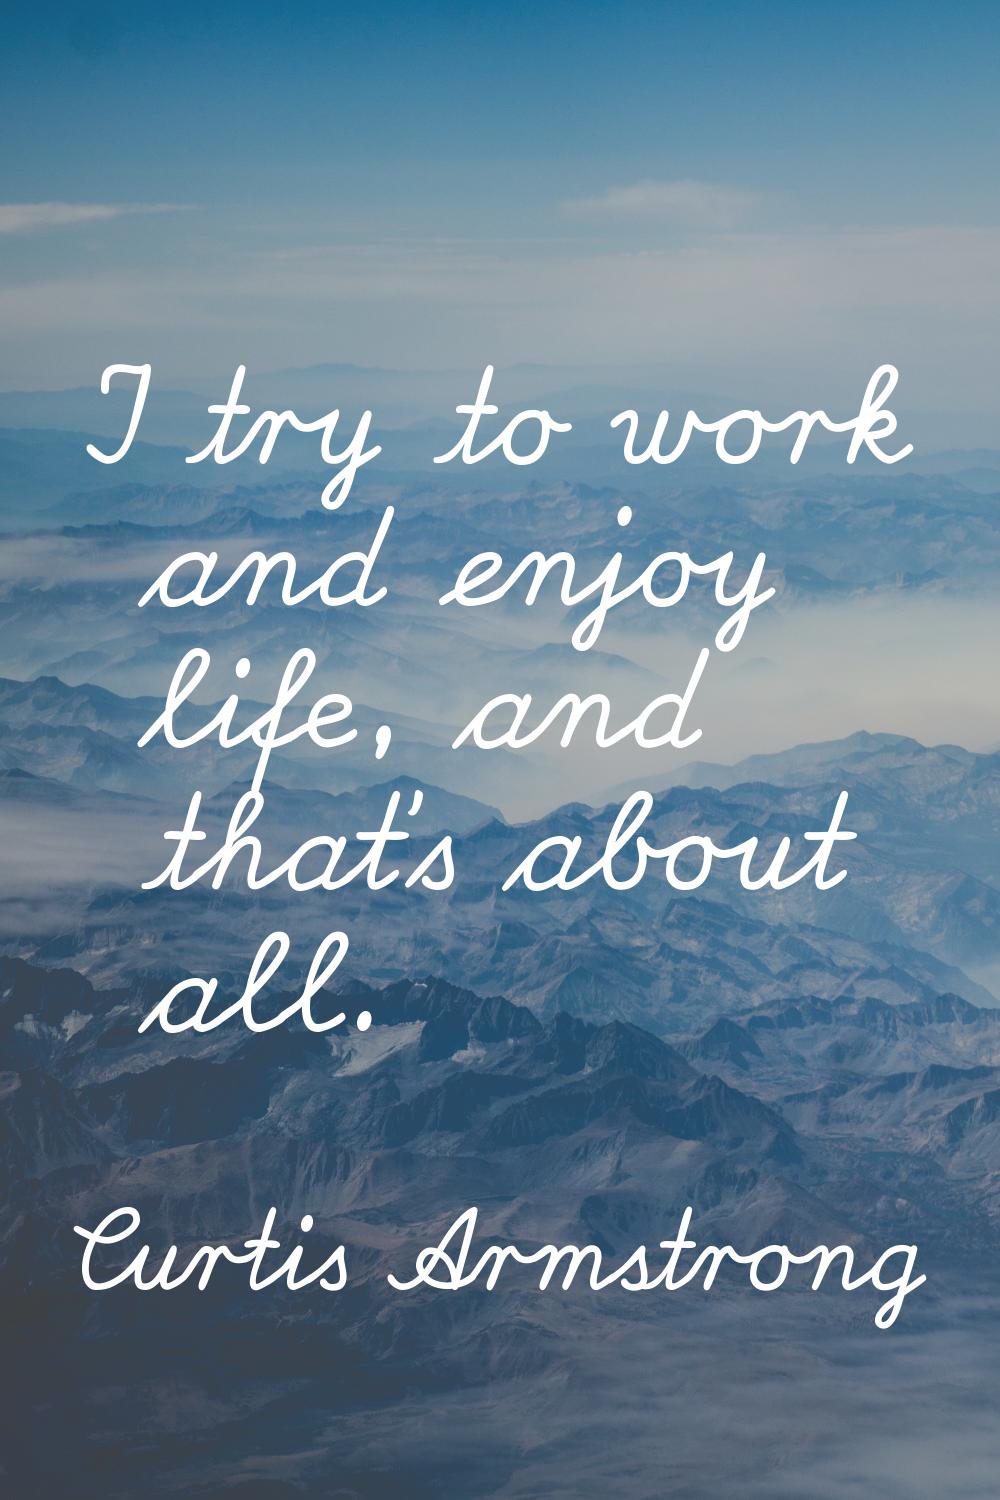 I try to work and enjoy life, and that's about all.